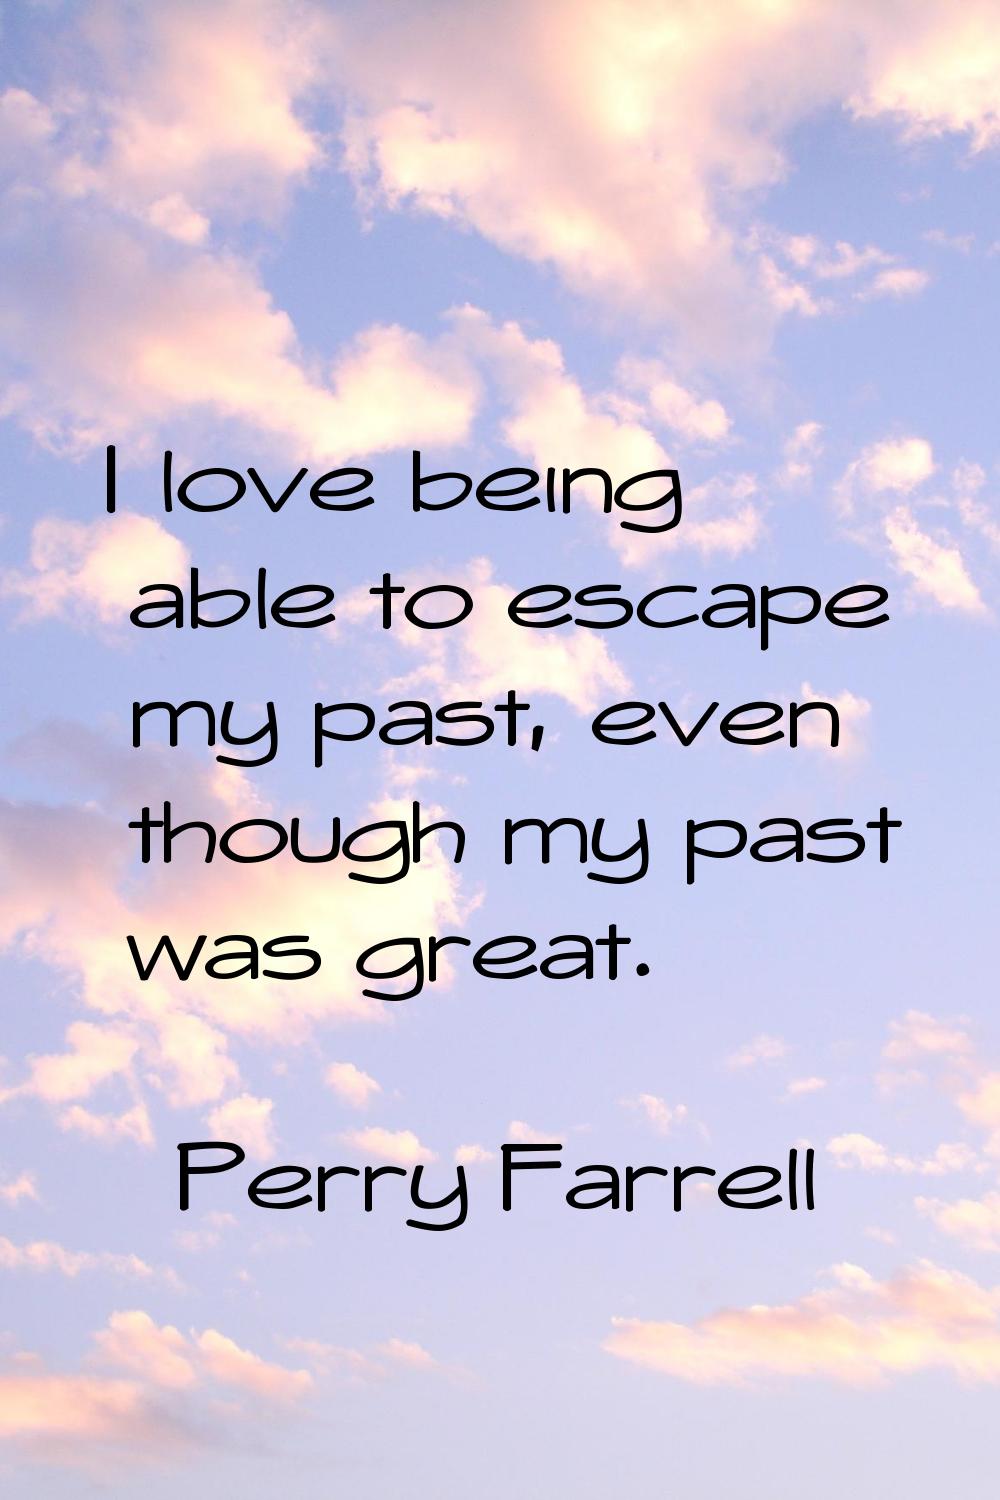 I love being able to escape my past, even though my past was great.